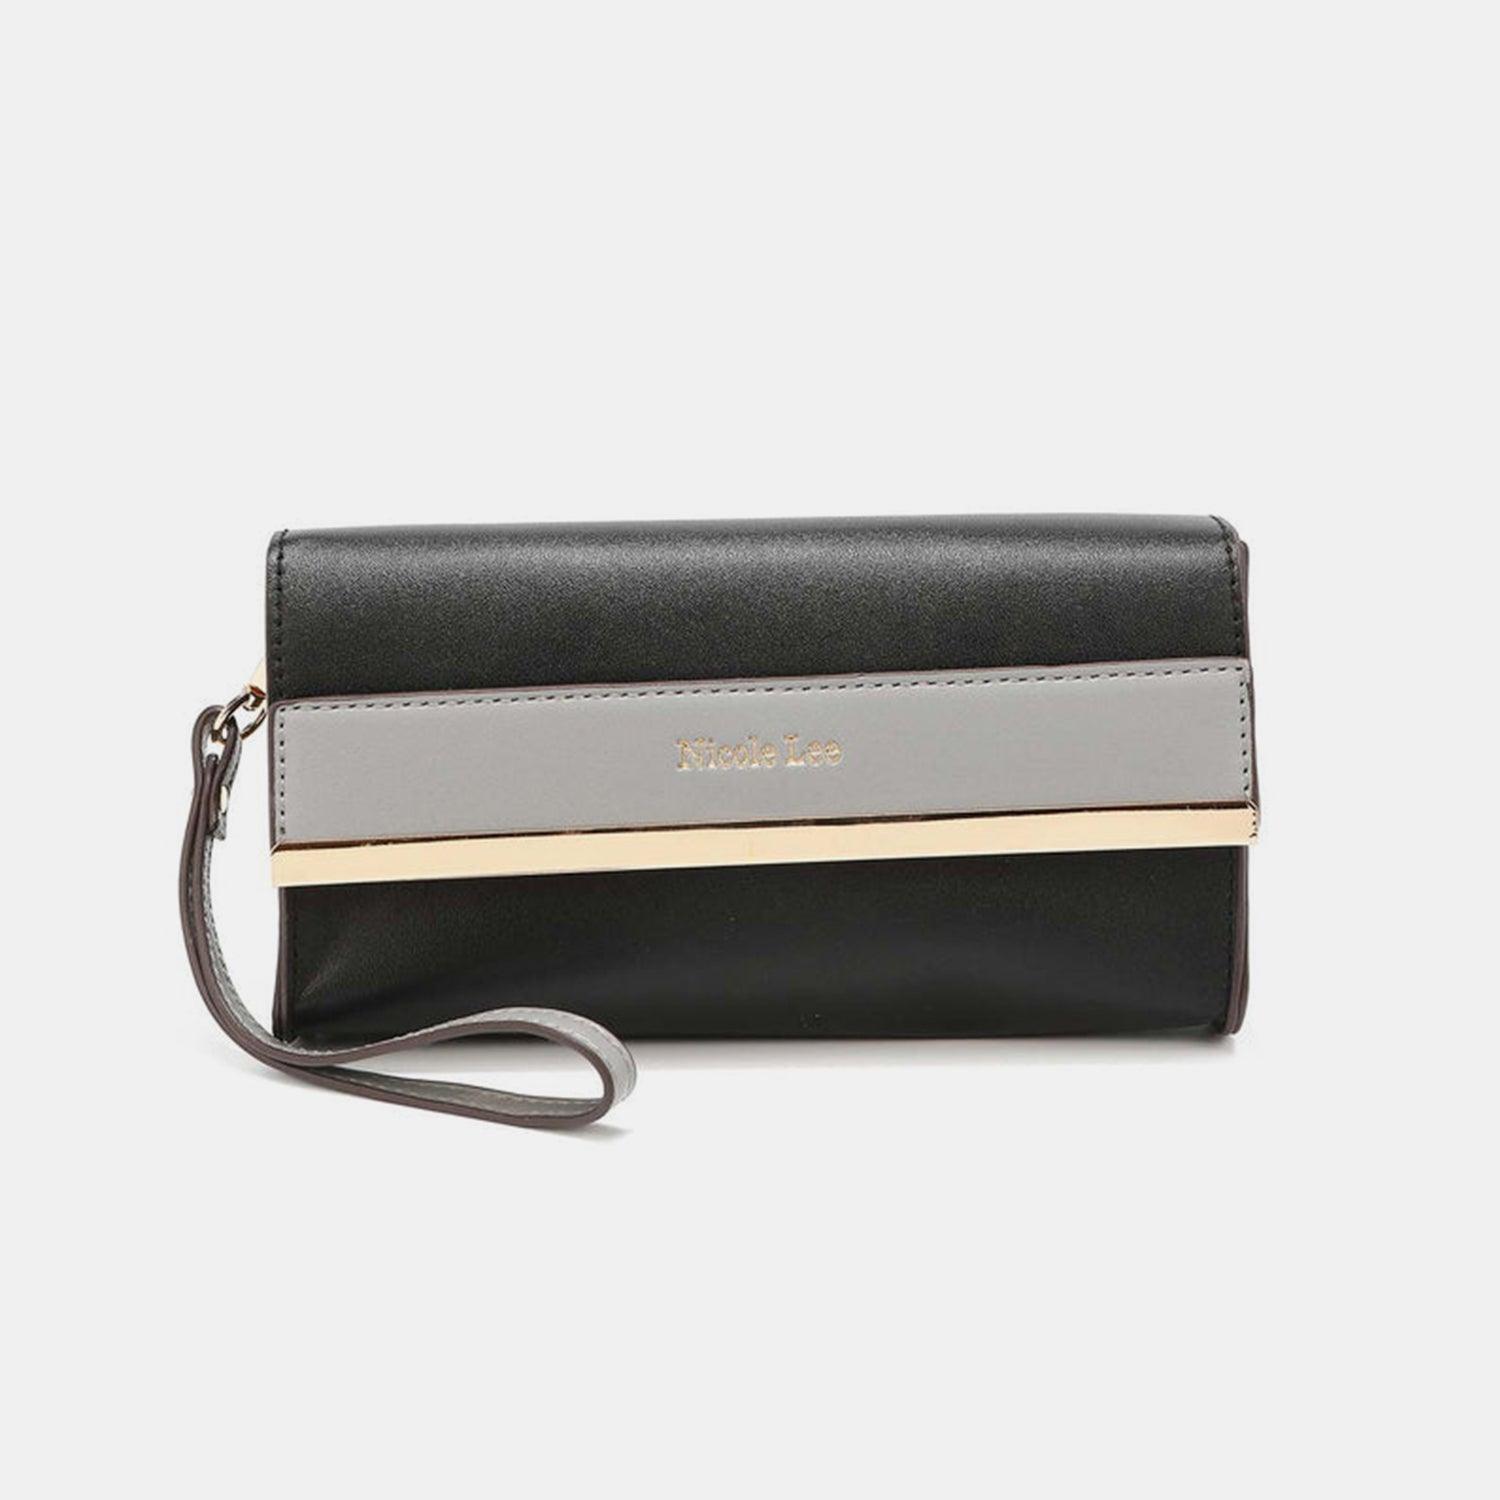 a black and grey wallet with a gold stripe